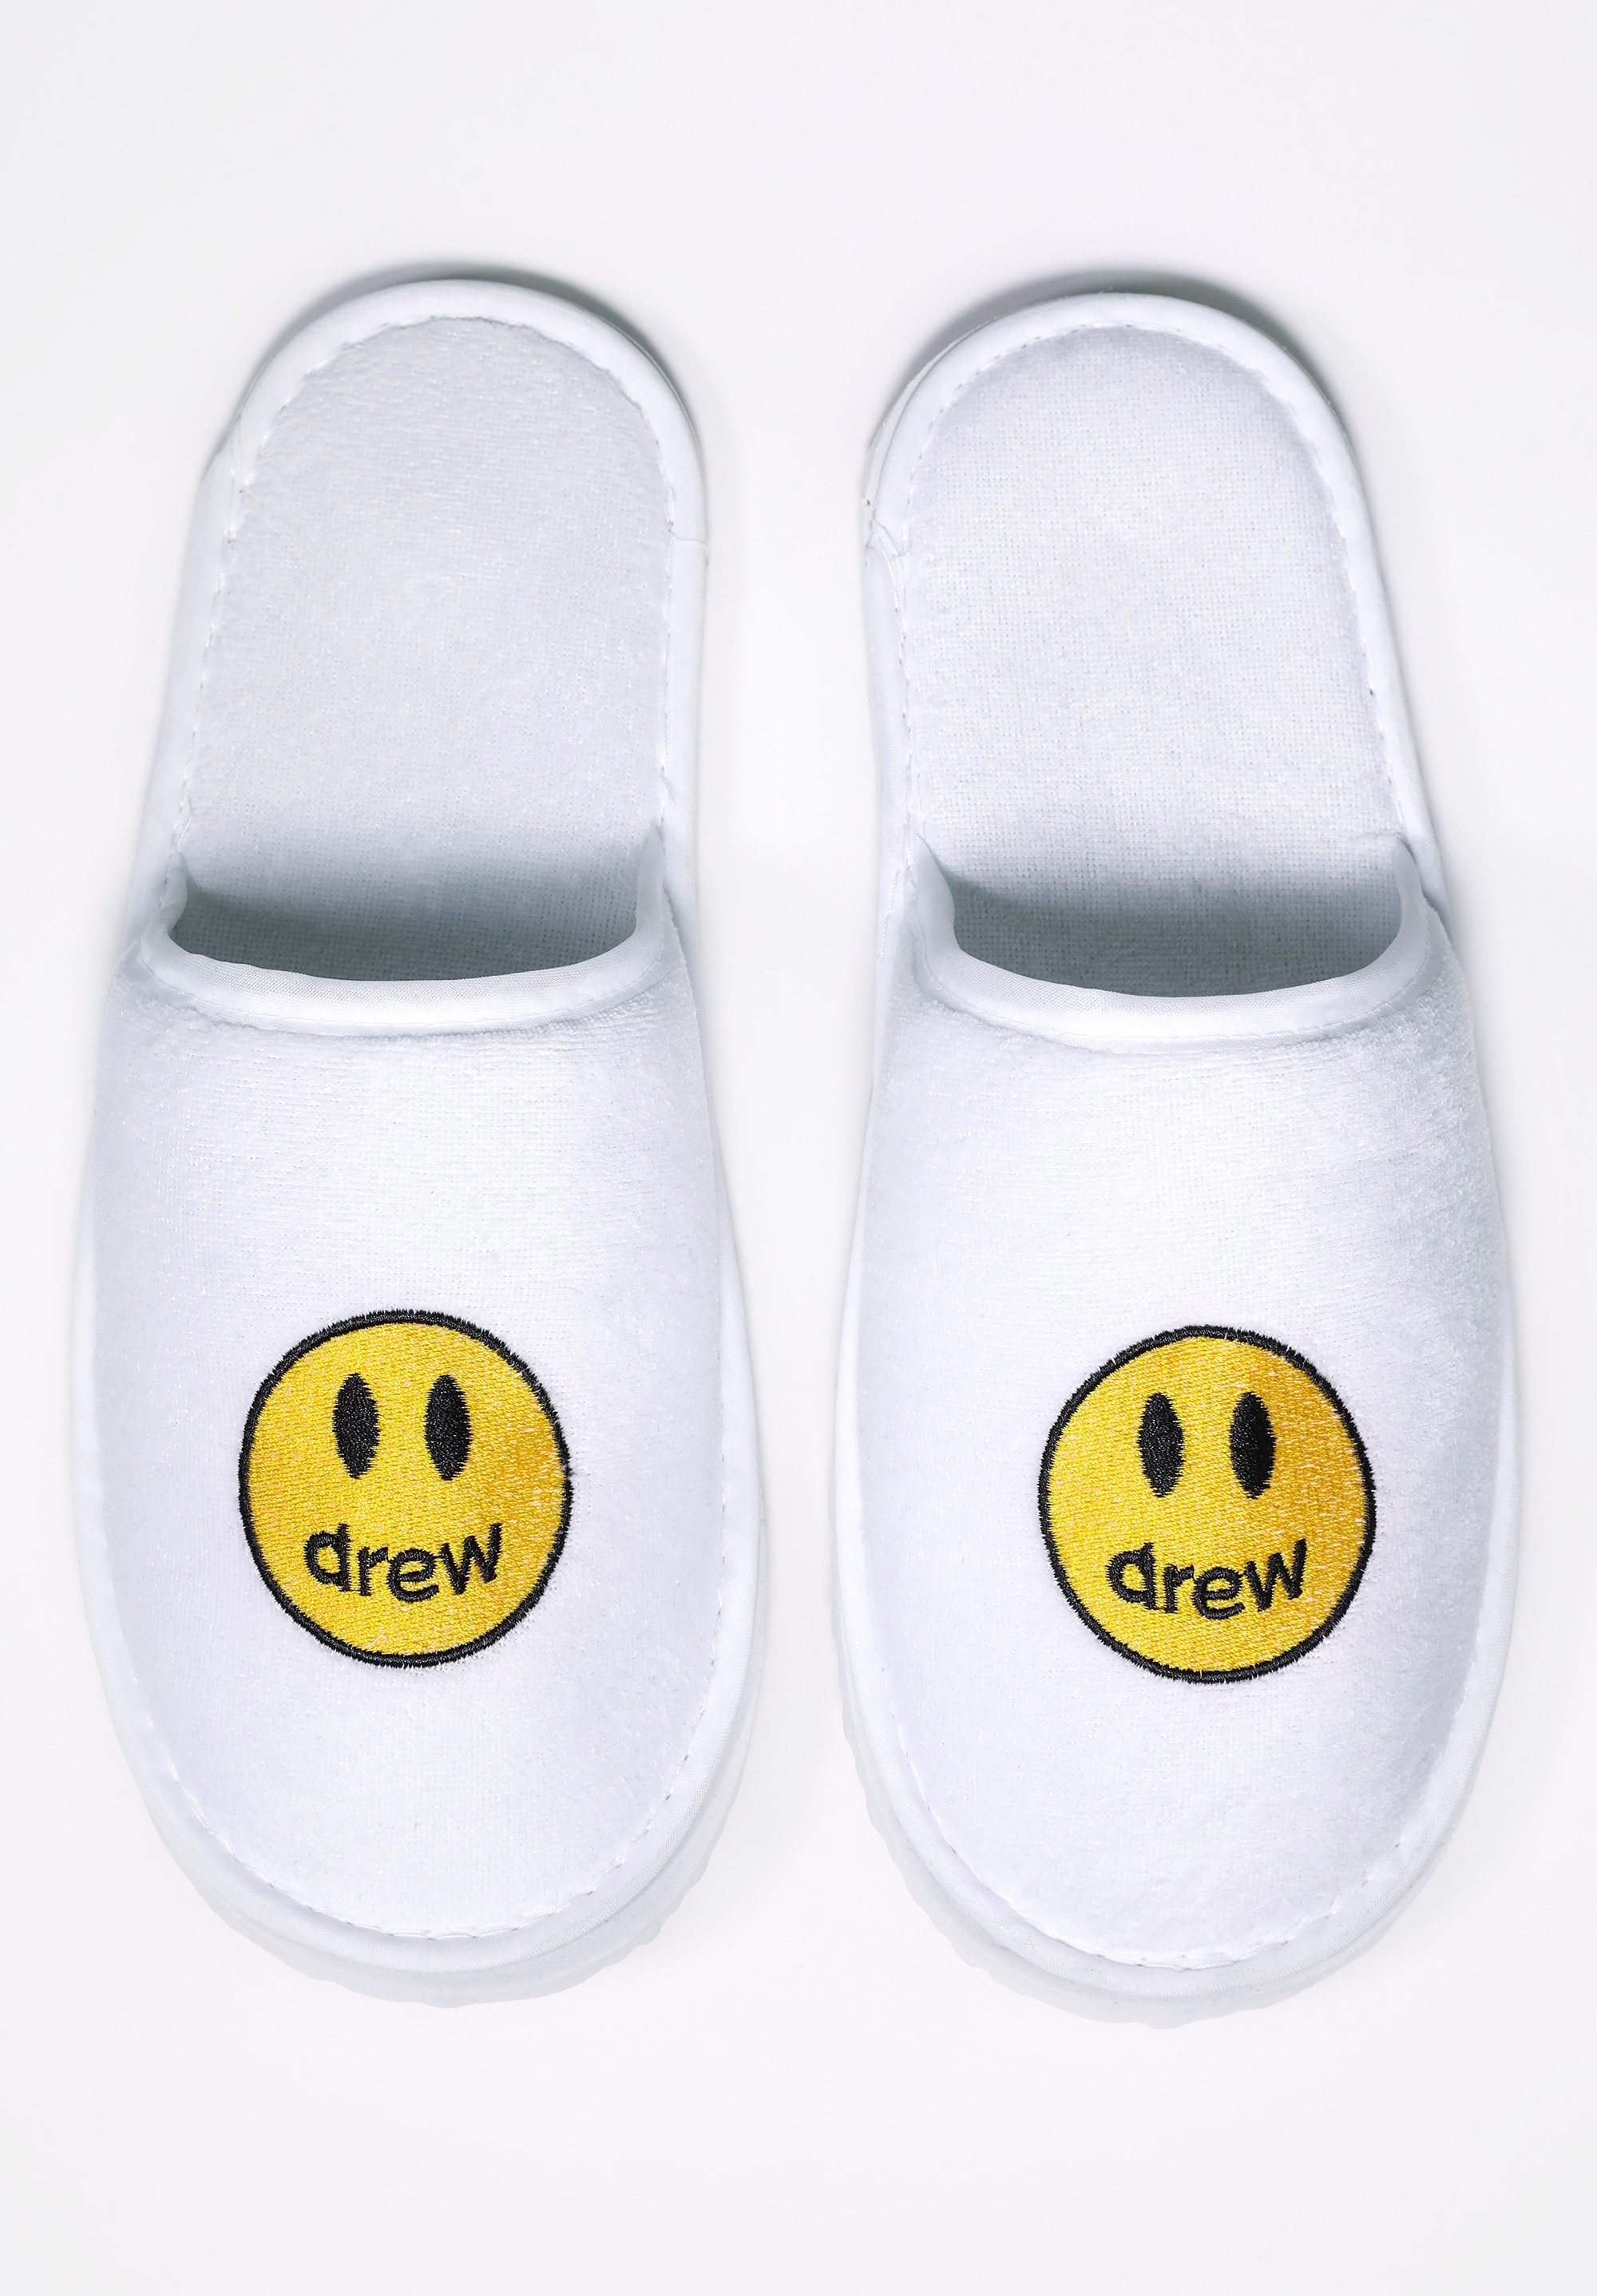 drew-drewhouse-smiley-house-slippers-justin-bieber-collection-shoes-white_02.jpg